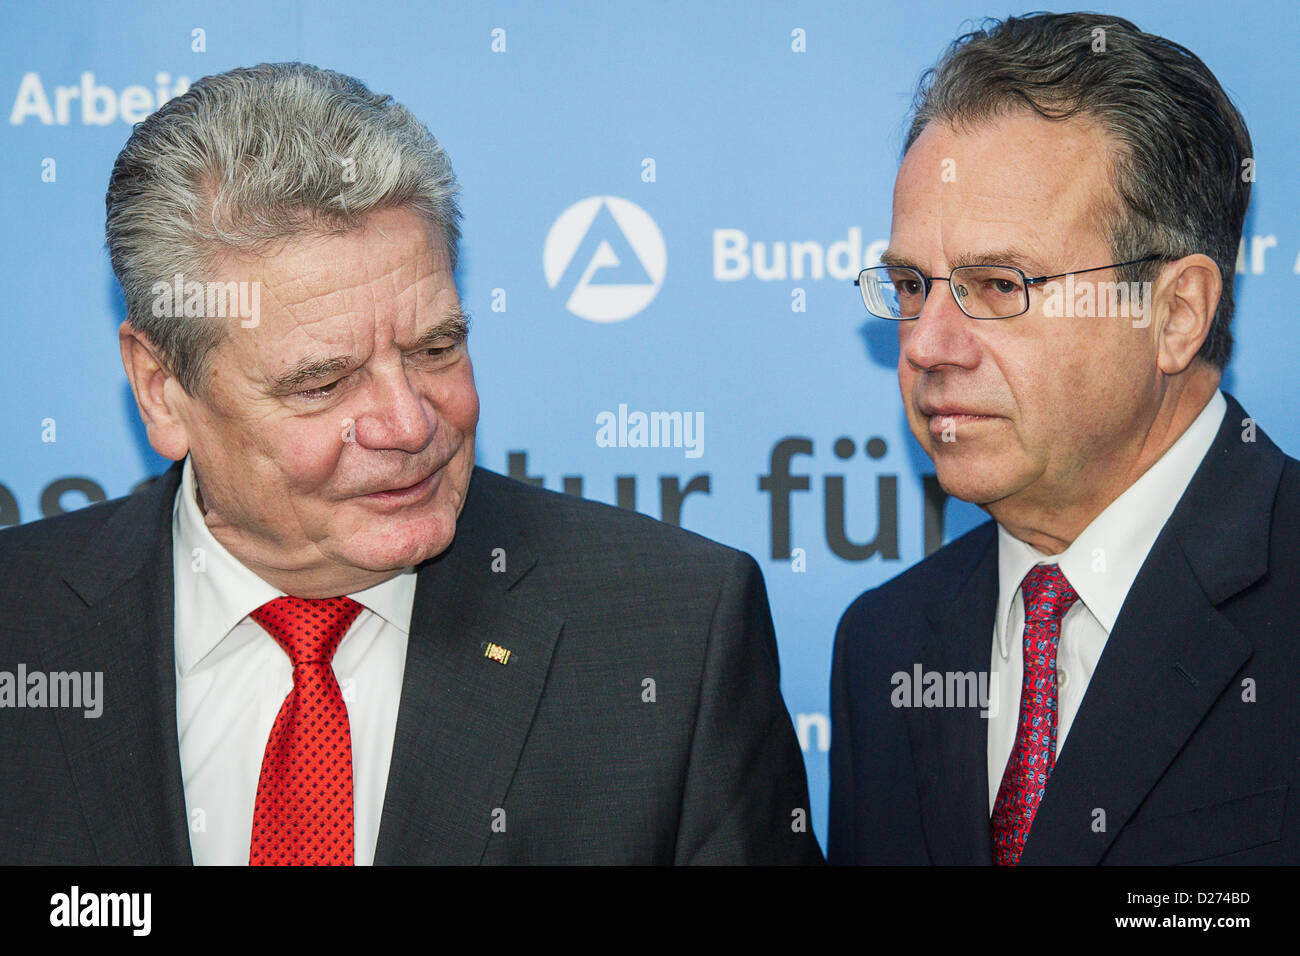 Chairman of the Federal Labour Office, Frank-Juergen Weise (R) welcomes German President Joachim Gauck (L) to the discussions about 'integration and labour market' at the Federal Labour Office in Nuernberg, Germany 15 January 2013. Photo: David Ebener Stock Photo